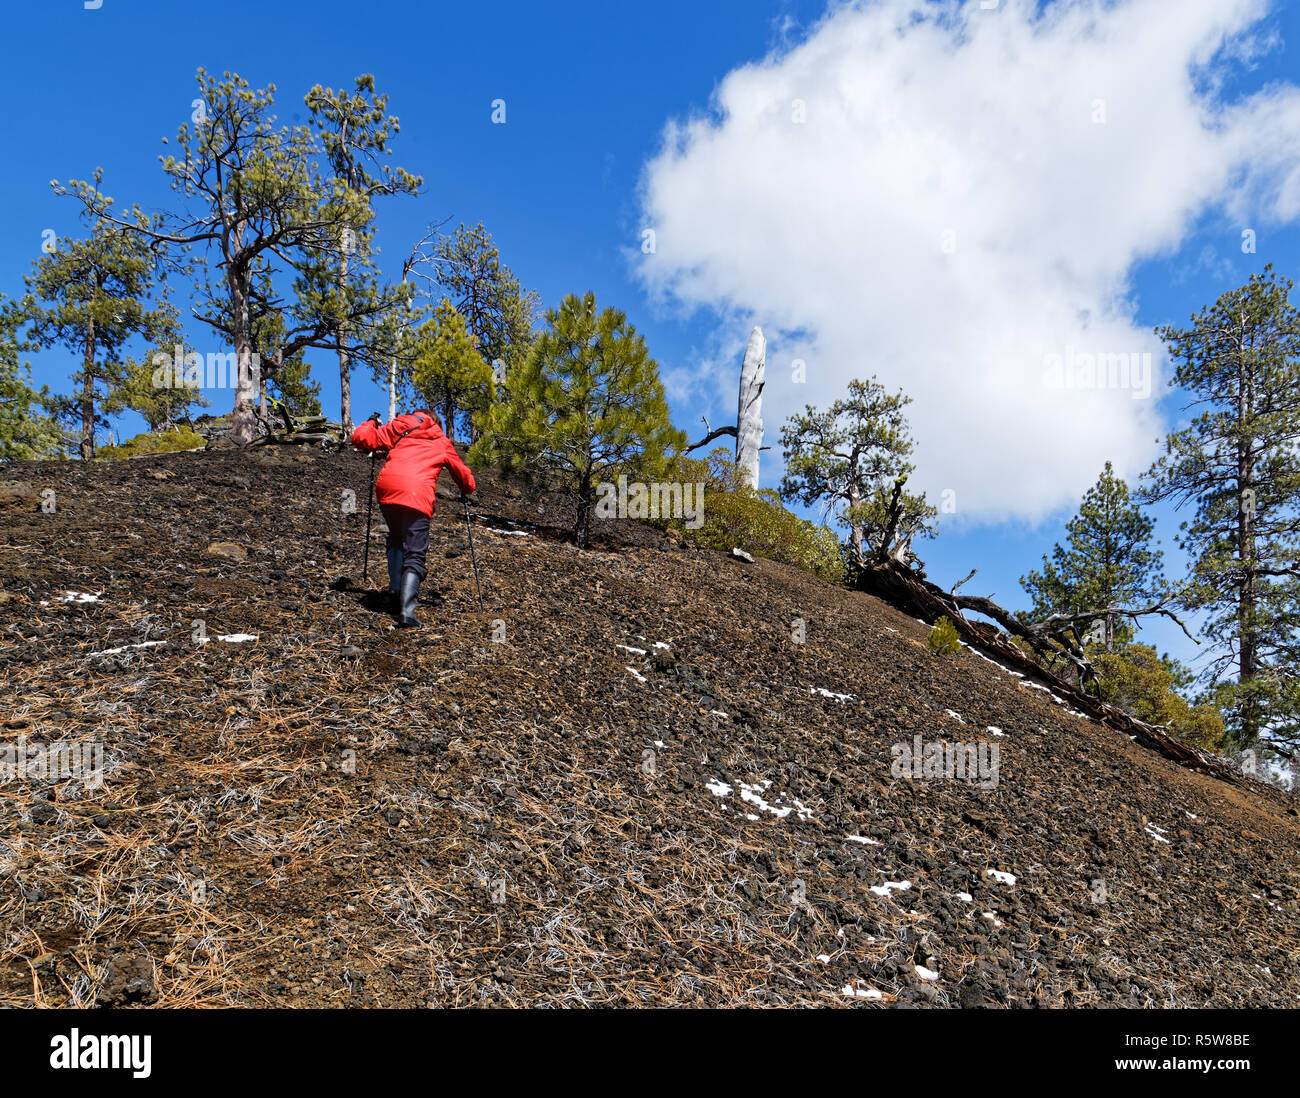 42,835.02048 Woman hiking struggling to climb a steep slope of a black cinder cone with Ponderosa pine trees (Pinus ponderosa), blue sky white clouds Stock Photo